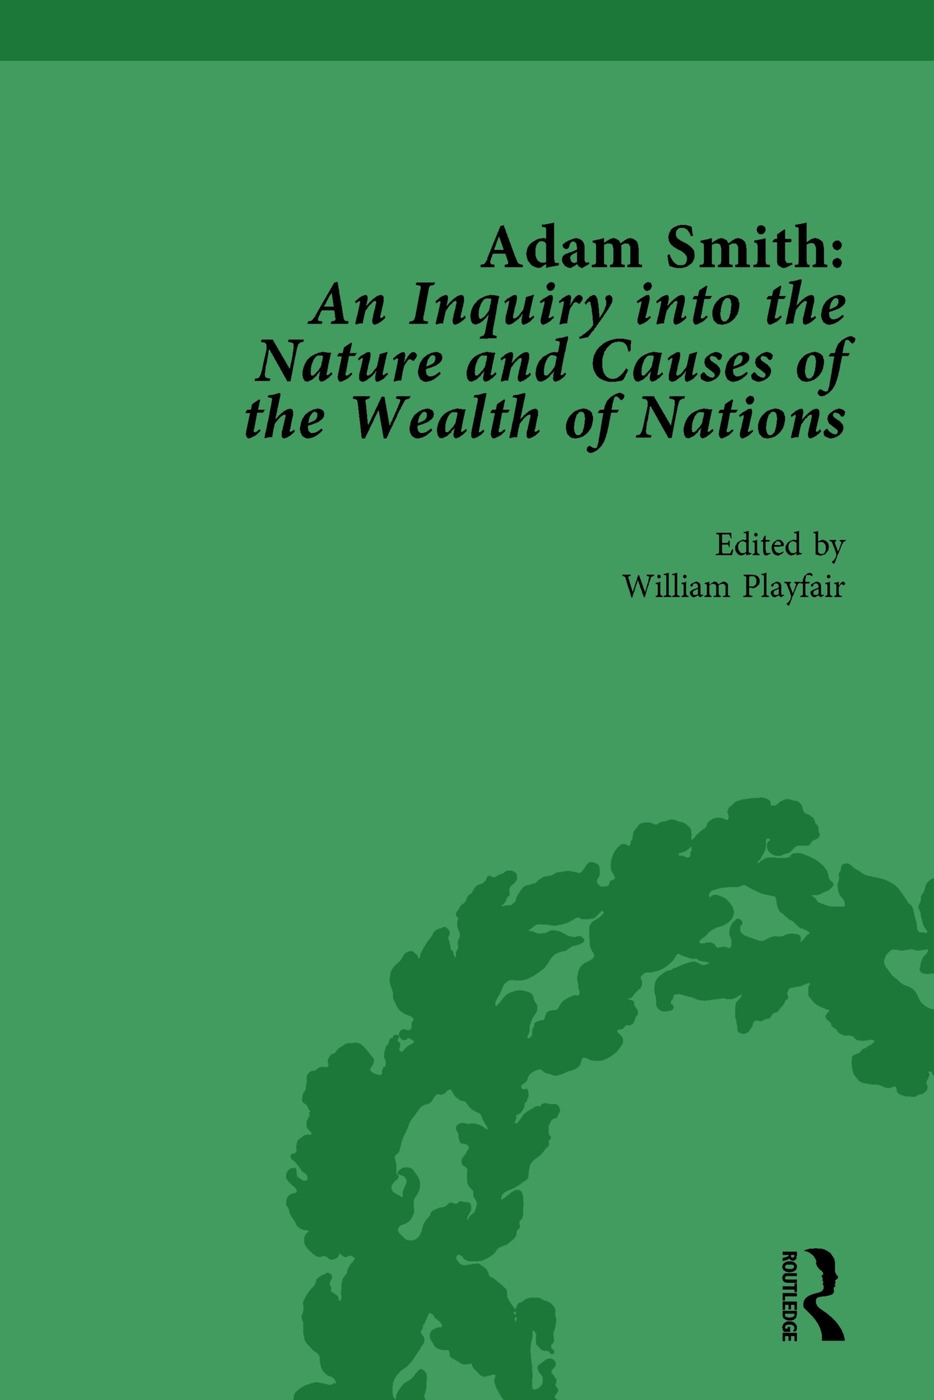 Adam Smith: An Inquiry Into the Nature and Causes of the Wealth of Nations, Volume 3: Edited by William Playfair